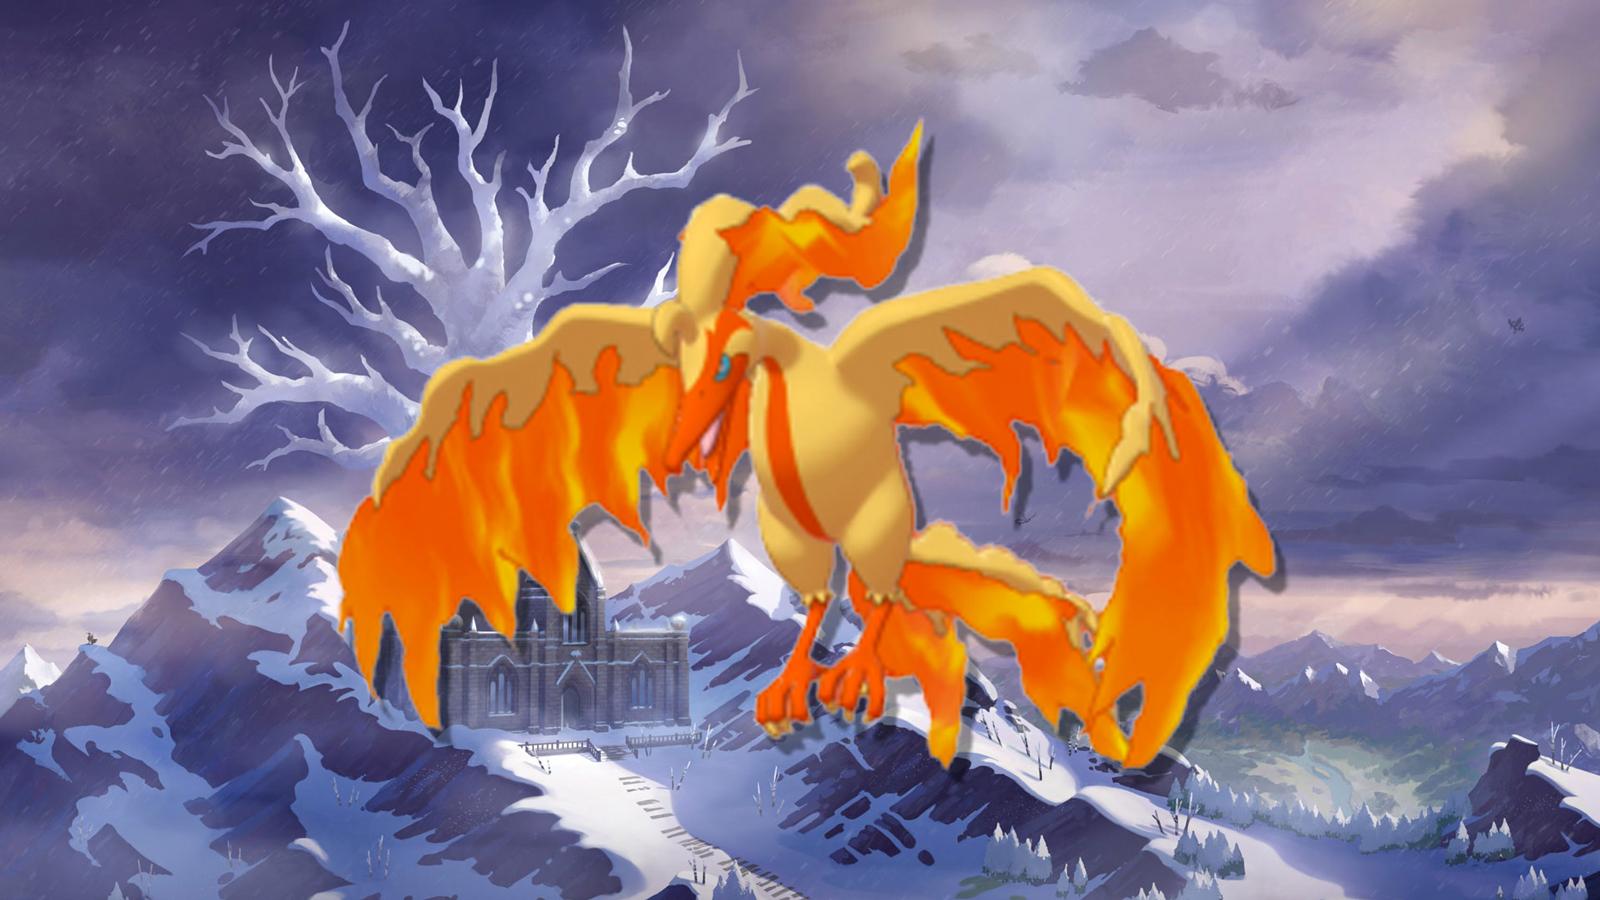 Shiny Galarian Moltres appearing in Pokemon Sword and Shield